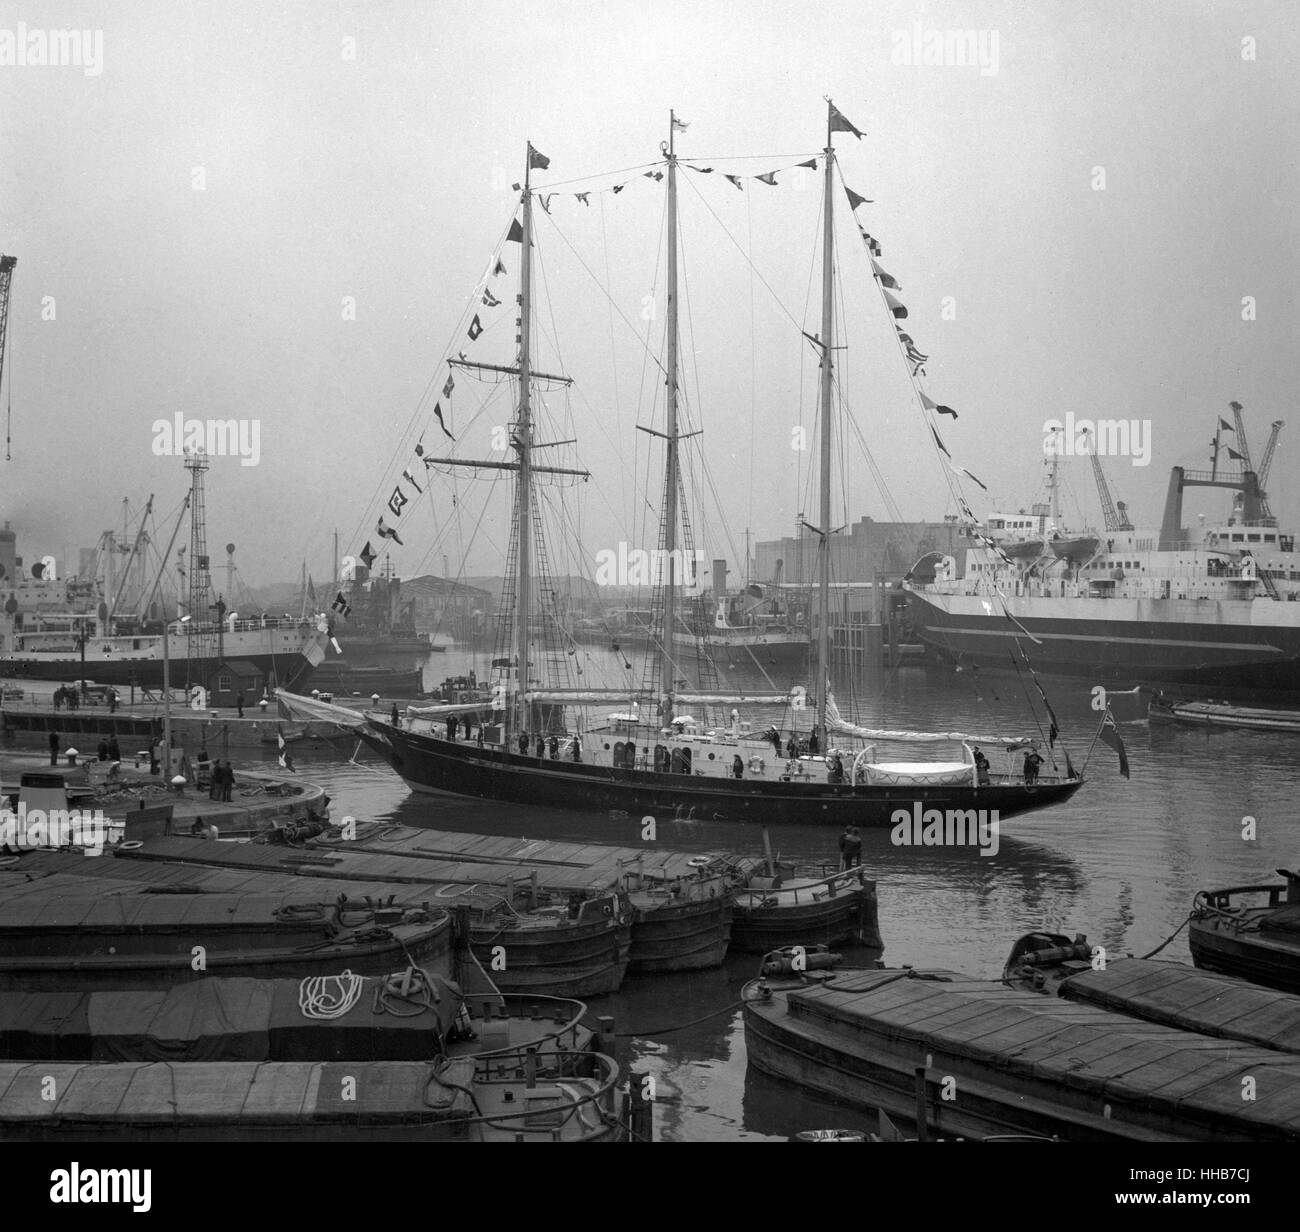 The sail training ship Sir Winston Churchill moves through King George V dock in Hull, after the dedication and naming ceremony. The ship has been built for the Sail Training Association as a character training vessel for British youth. Stock Photo